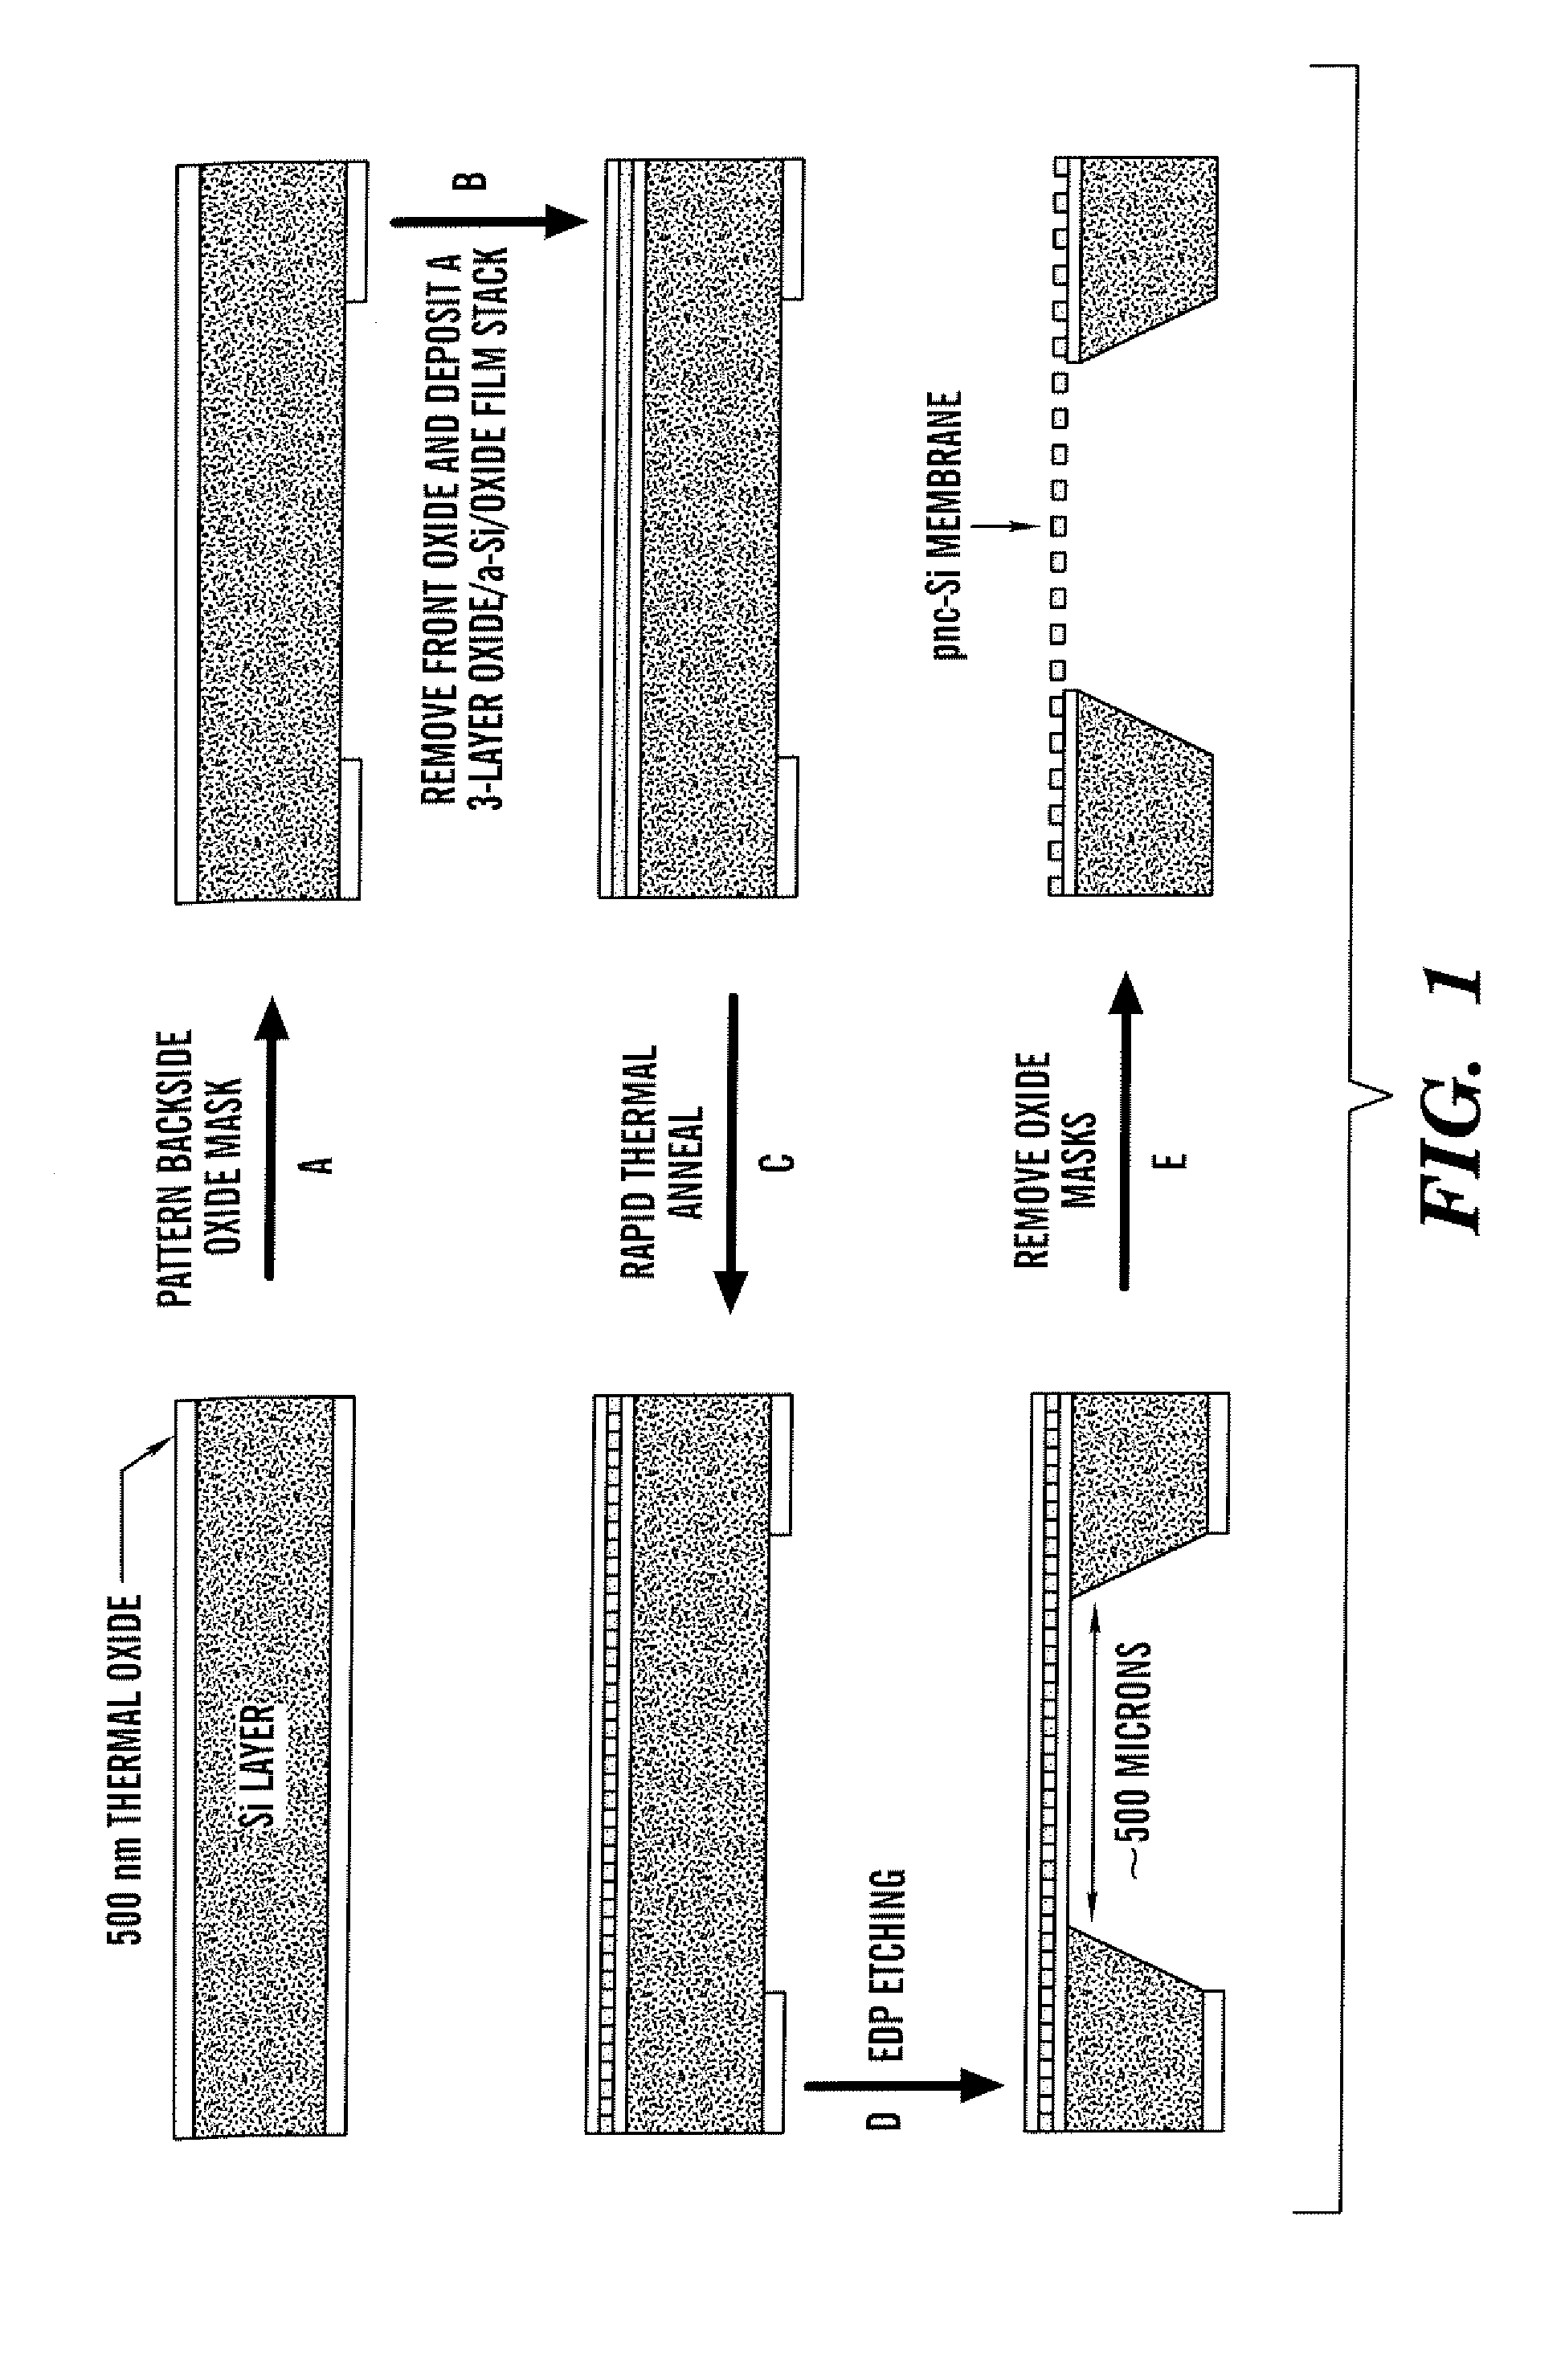 Ultrathin porous nanoscale membranes, methods of making, and uses thereof